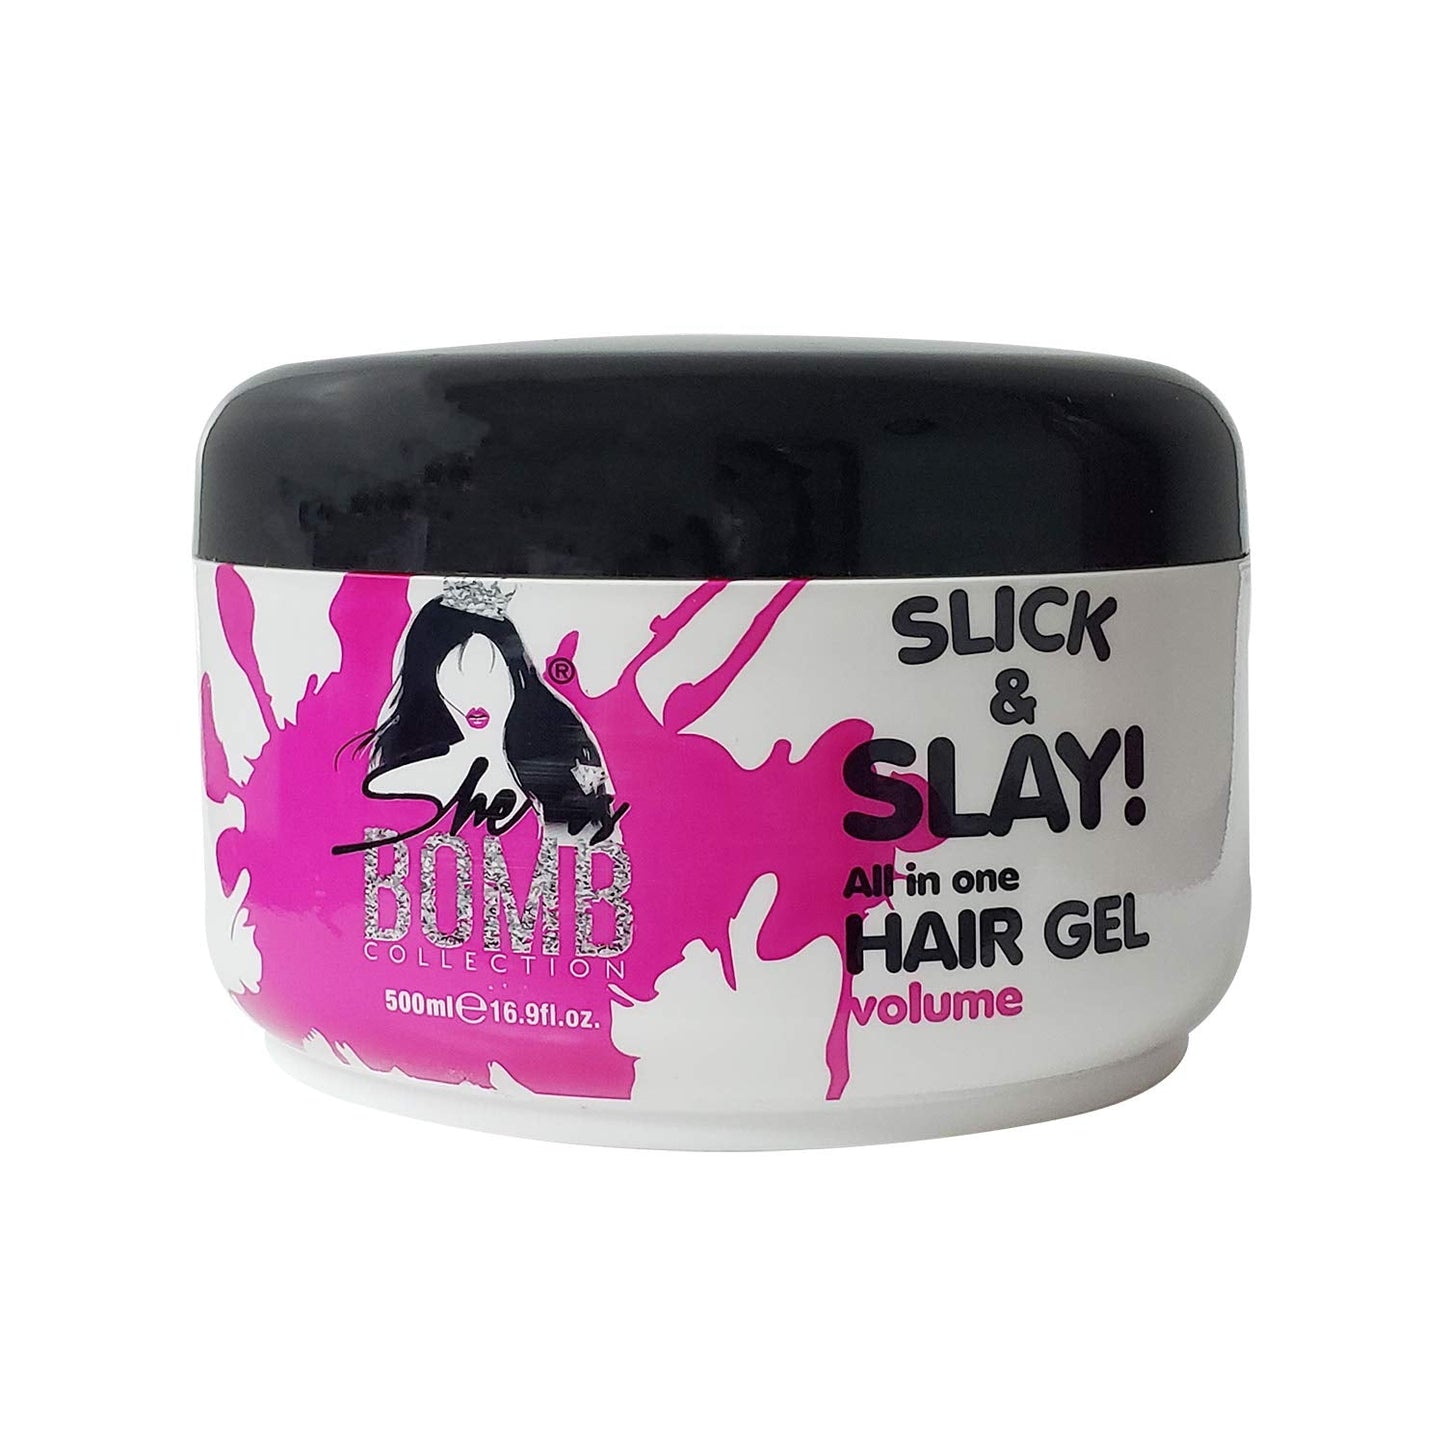 She Is Bomb Collection Slick & Slay All-in-One Hair Gel - VIP Extensions